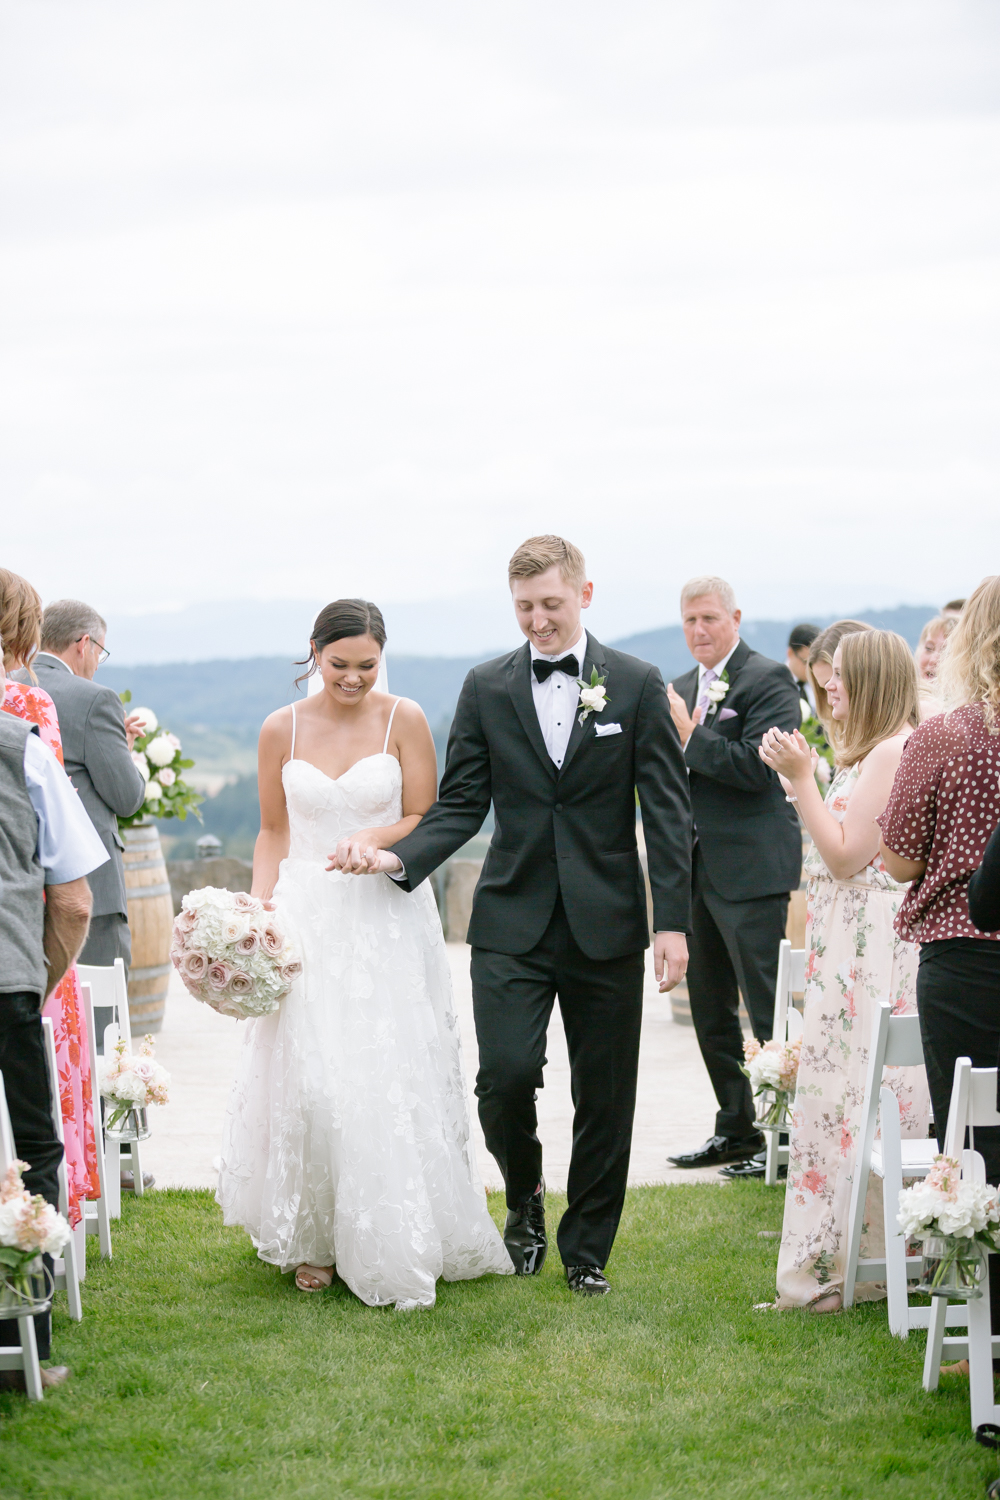 Youngberg Hill Vineyard Wedding in Wine Country Oregon - Corrie Mick Photography-331.jpg